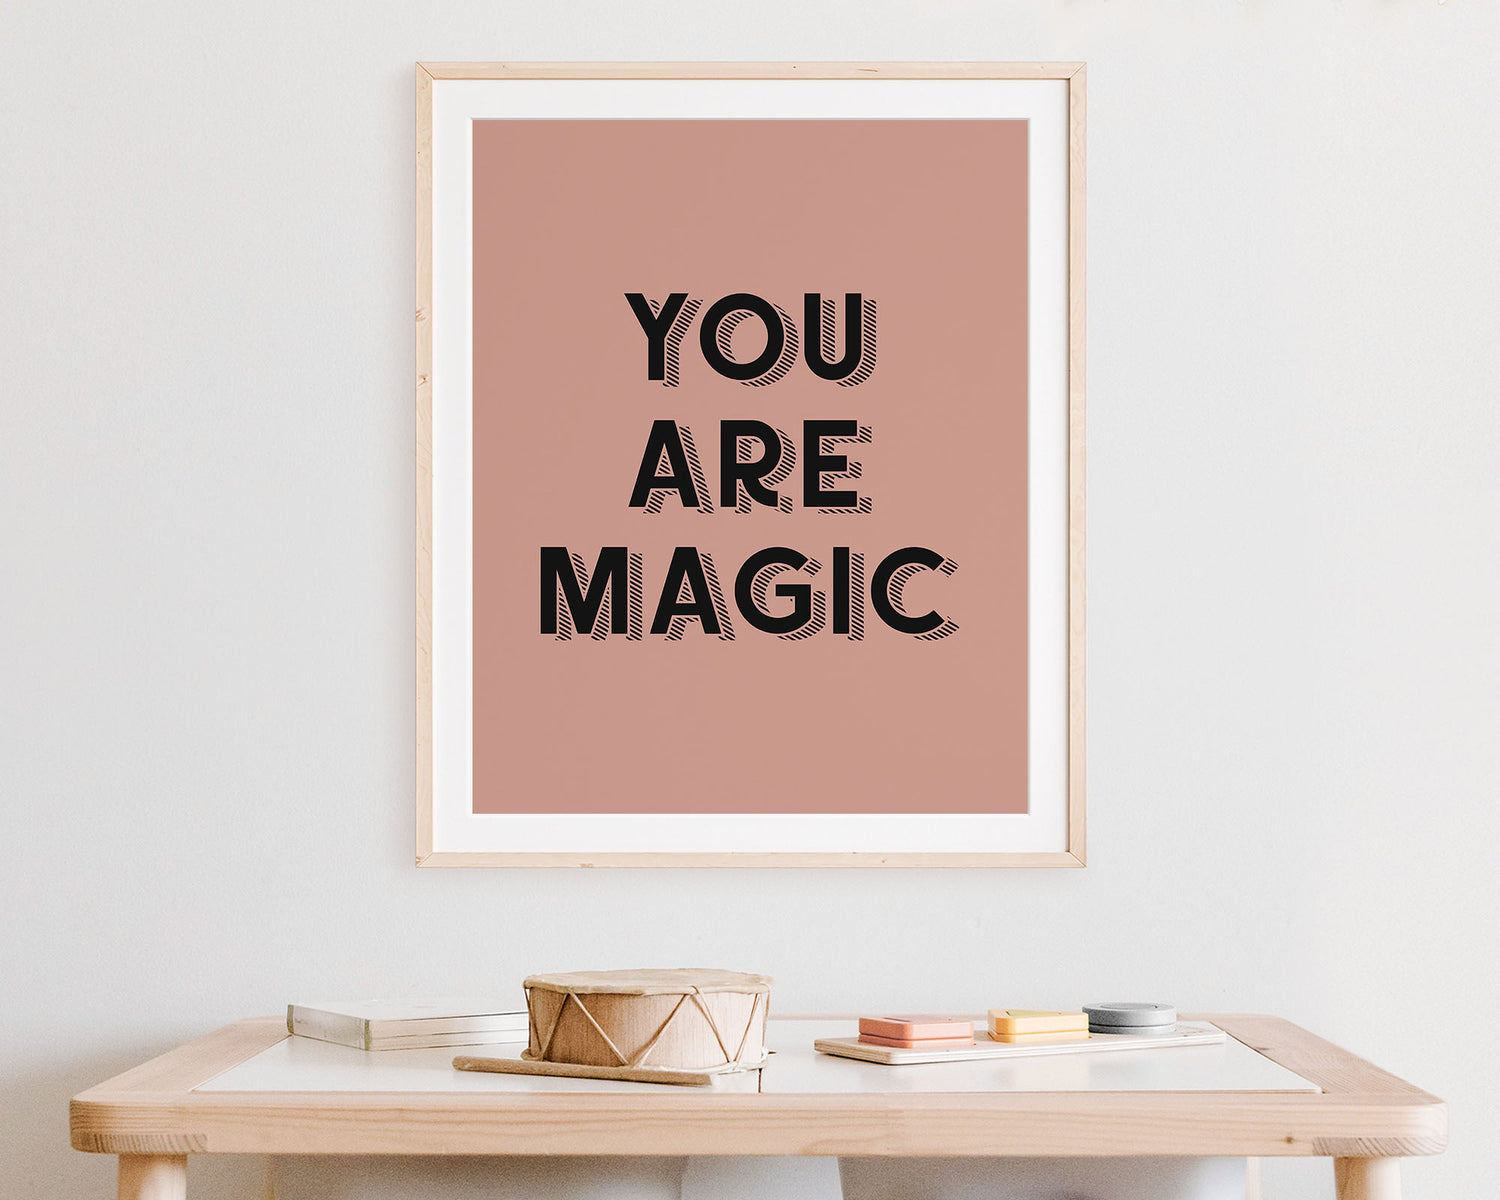 You Are Magic Instant Download Digital File featuring retro block shadowed lettering in black on an dusky rose background. Perfect for Baby Girls Nursery Decor, Toddler Girly Bedroom Decor or Little Girl Playroom Wall Art.